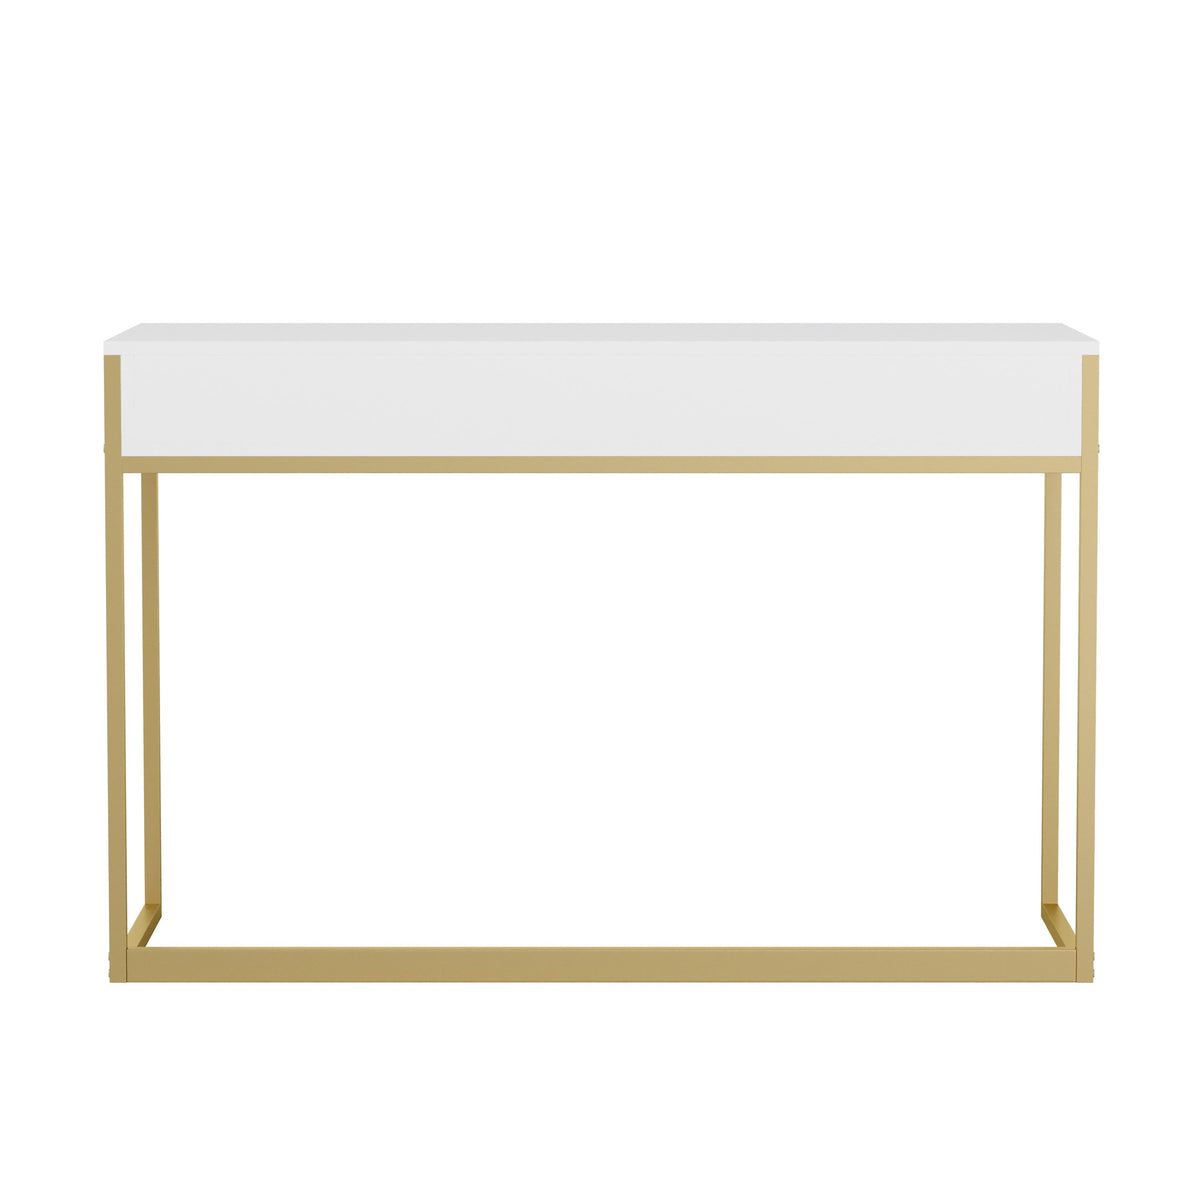 White Top/Polished Brass Frame |#| White 3 Drawer Home Office Desk with Polished Brass Metal Frame and Hardware